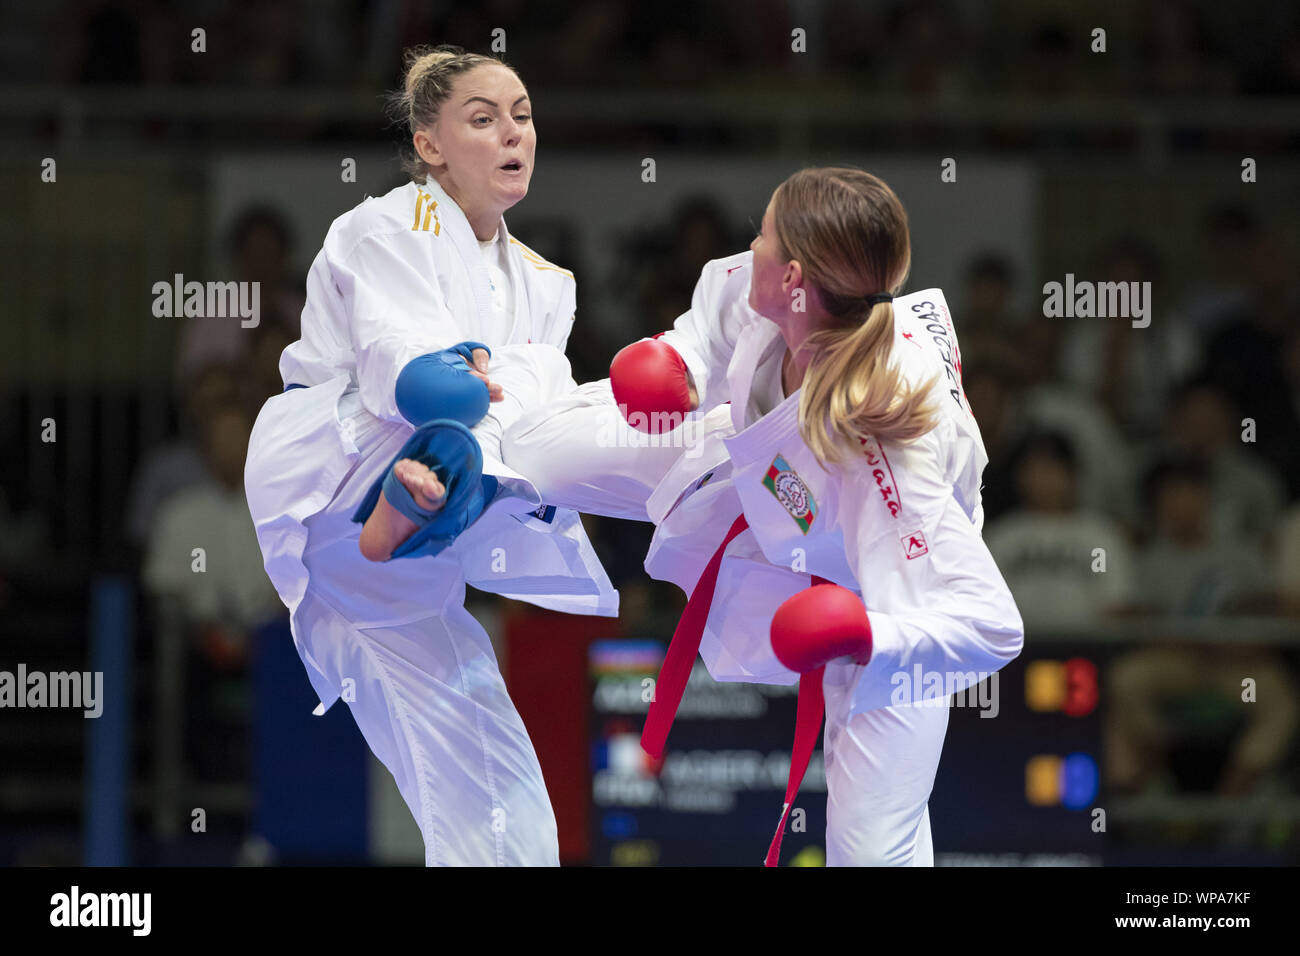 Tokyo, Japan. 8th Sep, 2019. Irina Zaretska of Azerbaijan (red) fights against Alizee Agier of France (blue) for the gold medal of the Female Kumite's -68 kg category at the Karate1 Premier League Tokyo 2019. The Karate1 Premier League is held from September 6 to 8 at the Nippon Budokan. The Karate will make its debut appearance at the Tokyo 2020 Summer Olympic Games. Irina Zaretska won the gold. Credit: Rodrigo Reyes Marin/ZUMA Wire/Alamy Live News Stock Photo